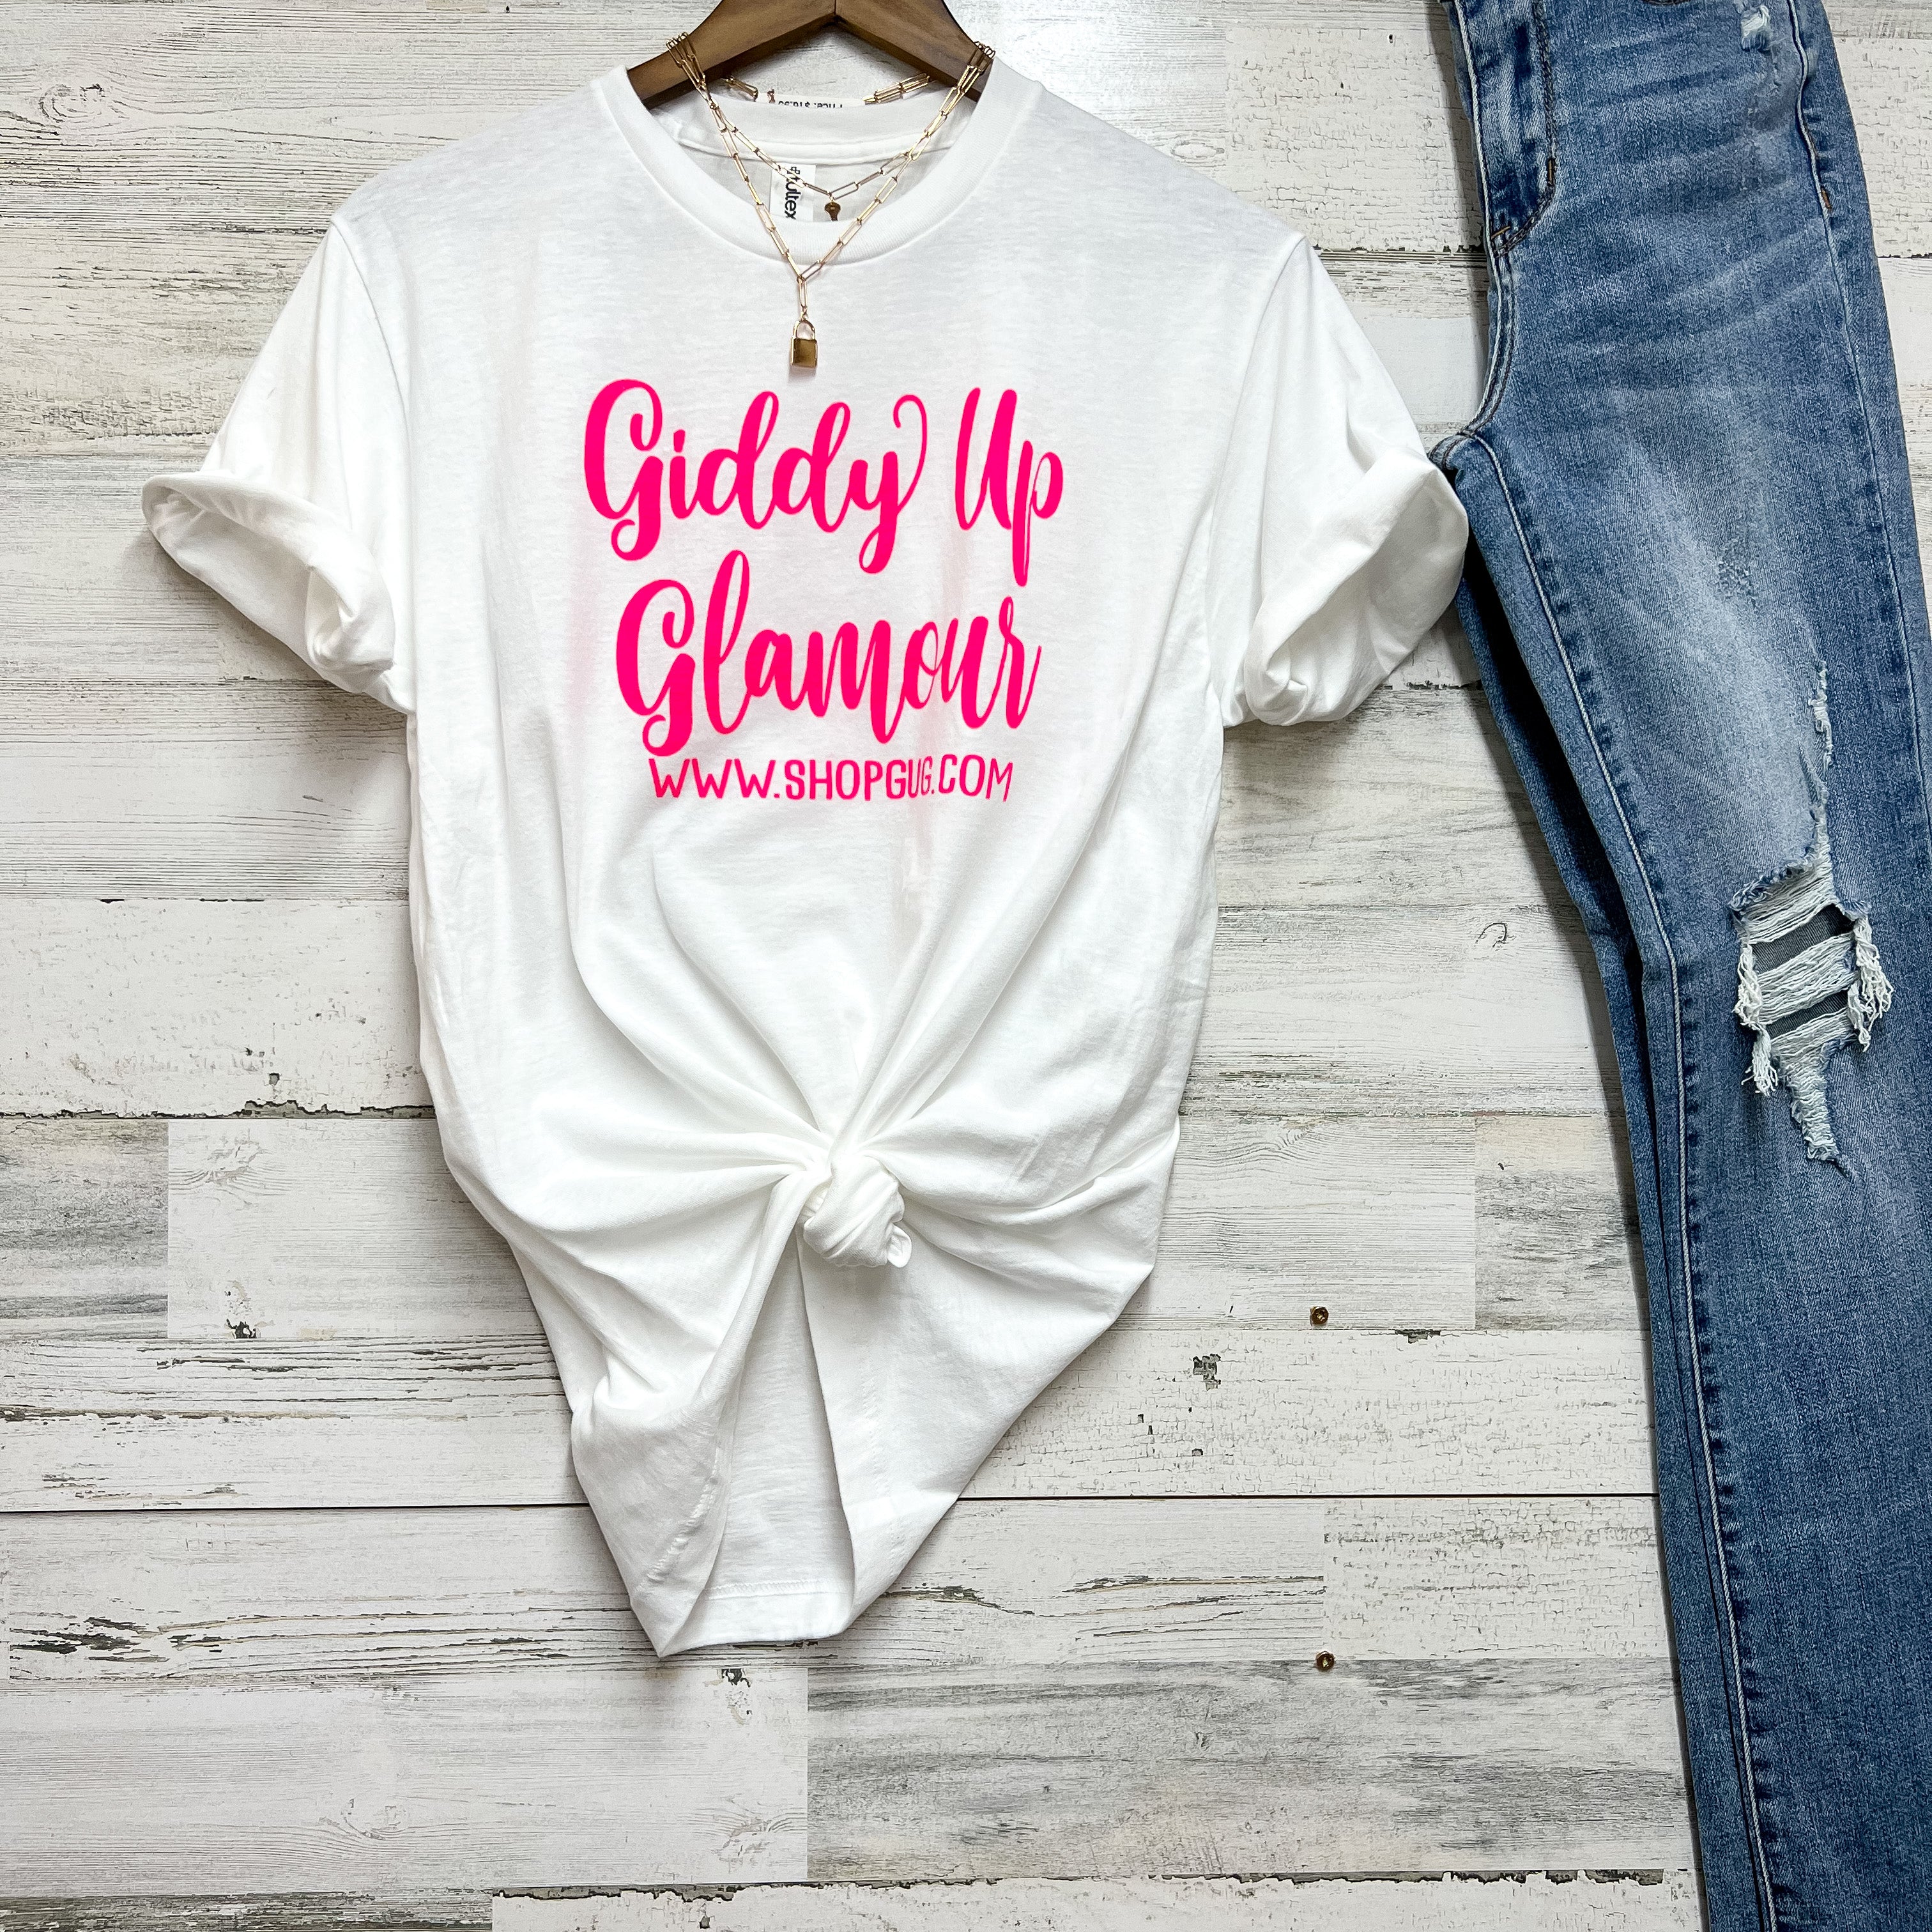 Black Friday Free Gift | Giddy Up Glamour Pink Graphic Logo Tee in White - Giddy Up Glamour Boutique